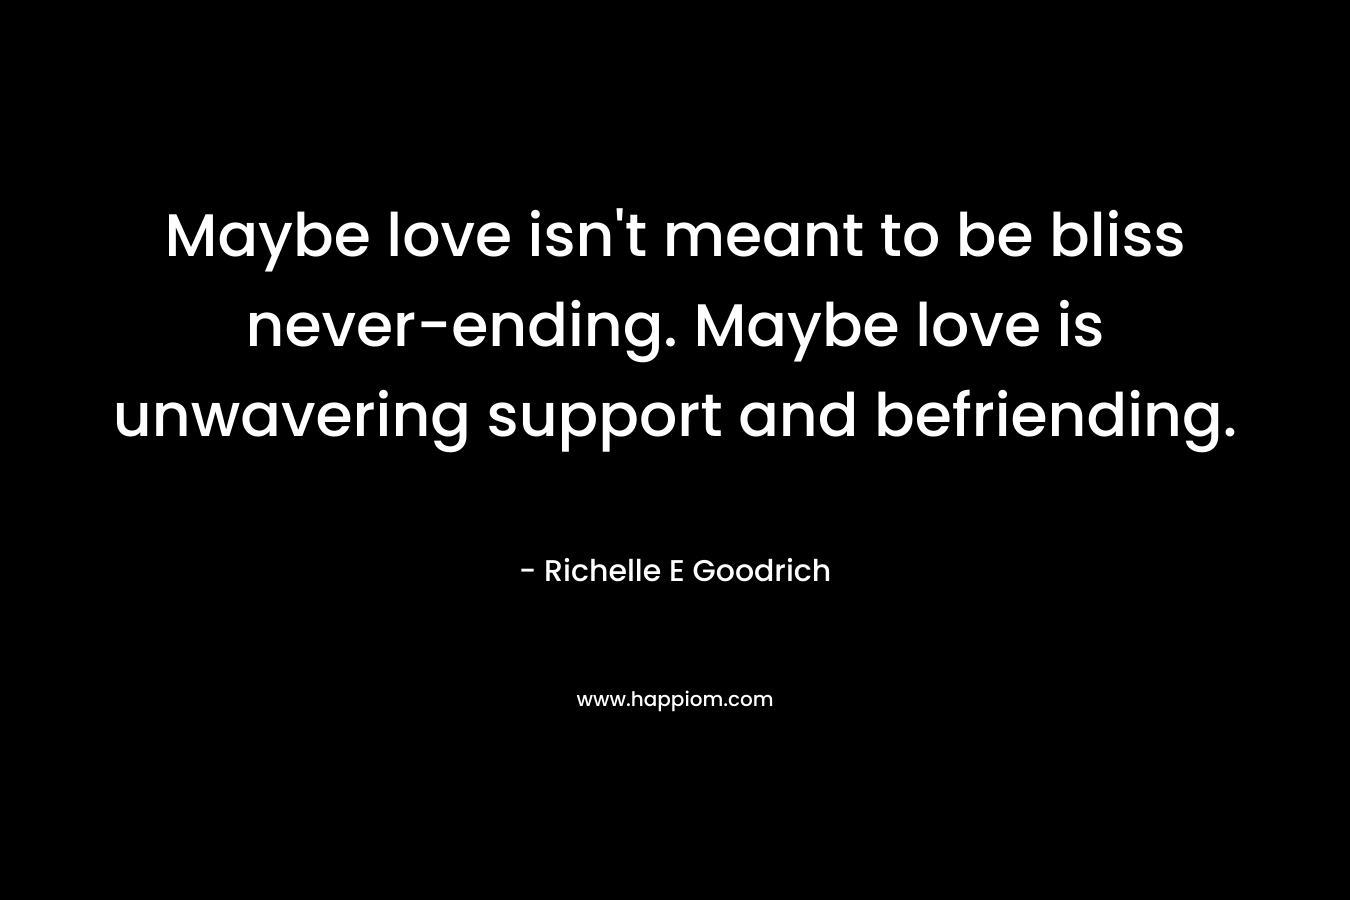 Maybe love isn't meant to be bliss never-ending. Maybe love is unwavering support and befriending.